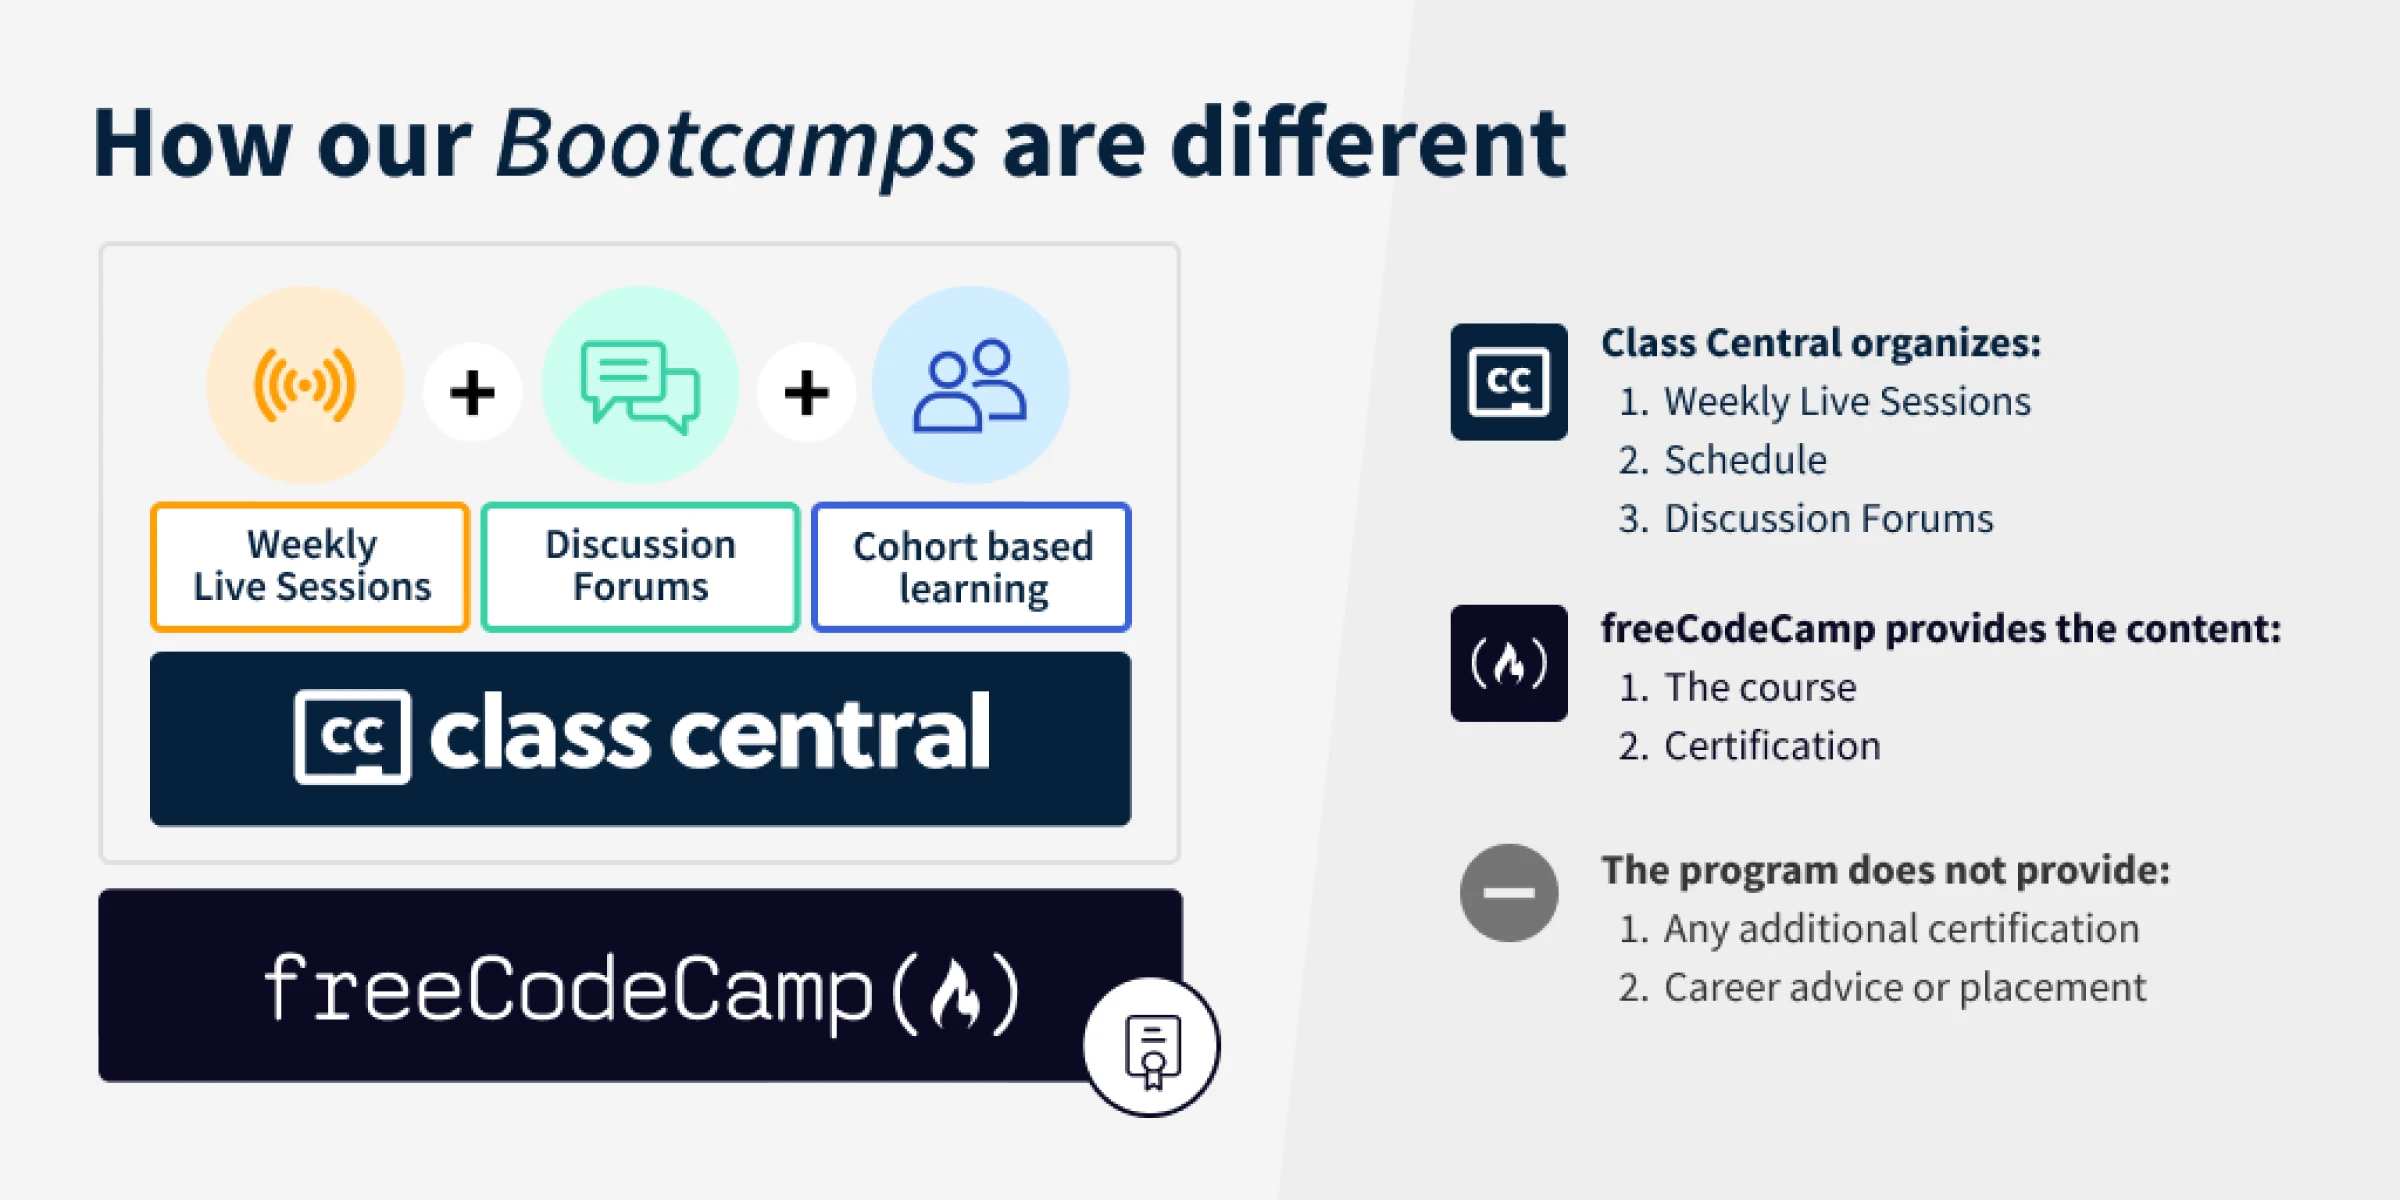 freeCodeCamp's infographic showing its bootcamps' USP with live session, forums, and cohort based learning.